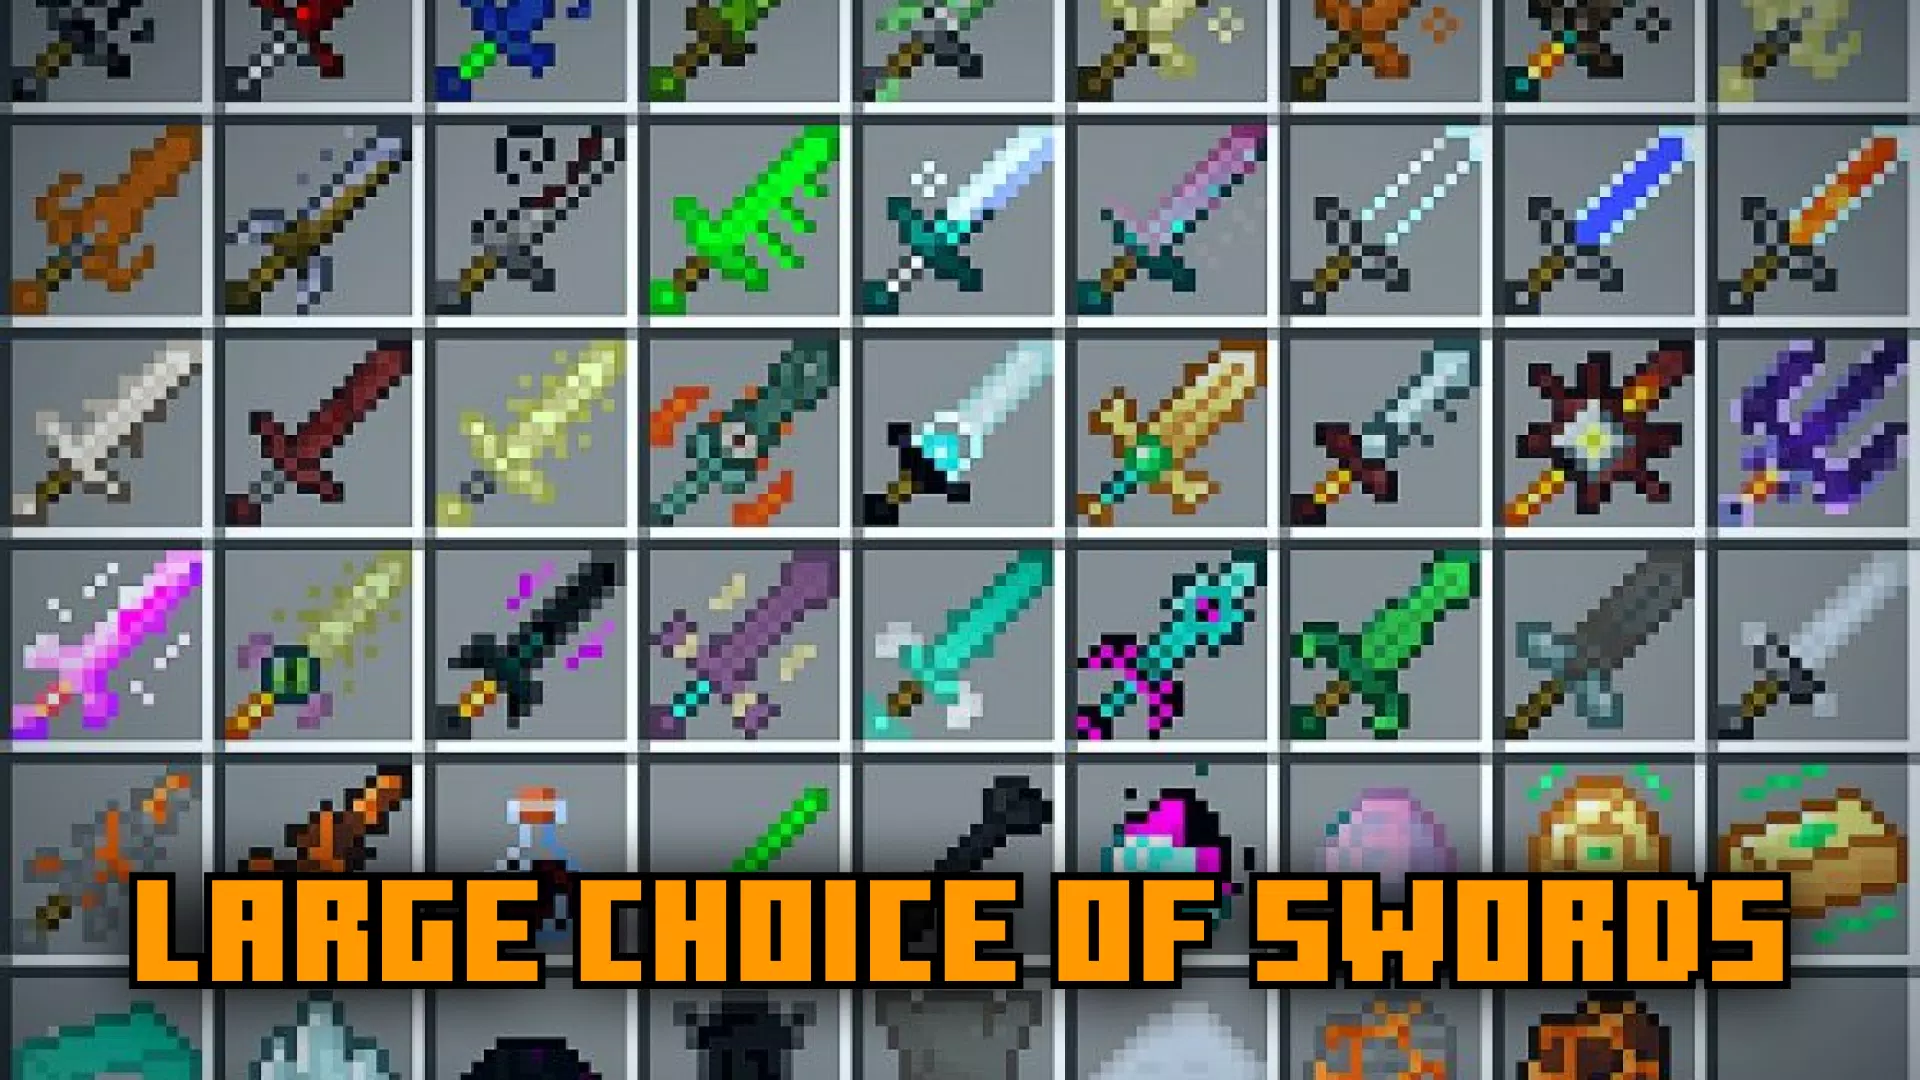 Mod Strongest Sword For Mcpe for Android - Download